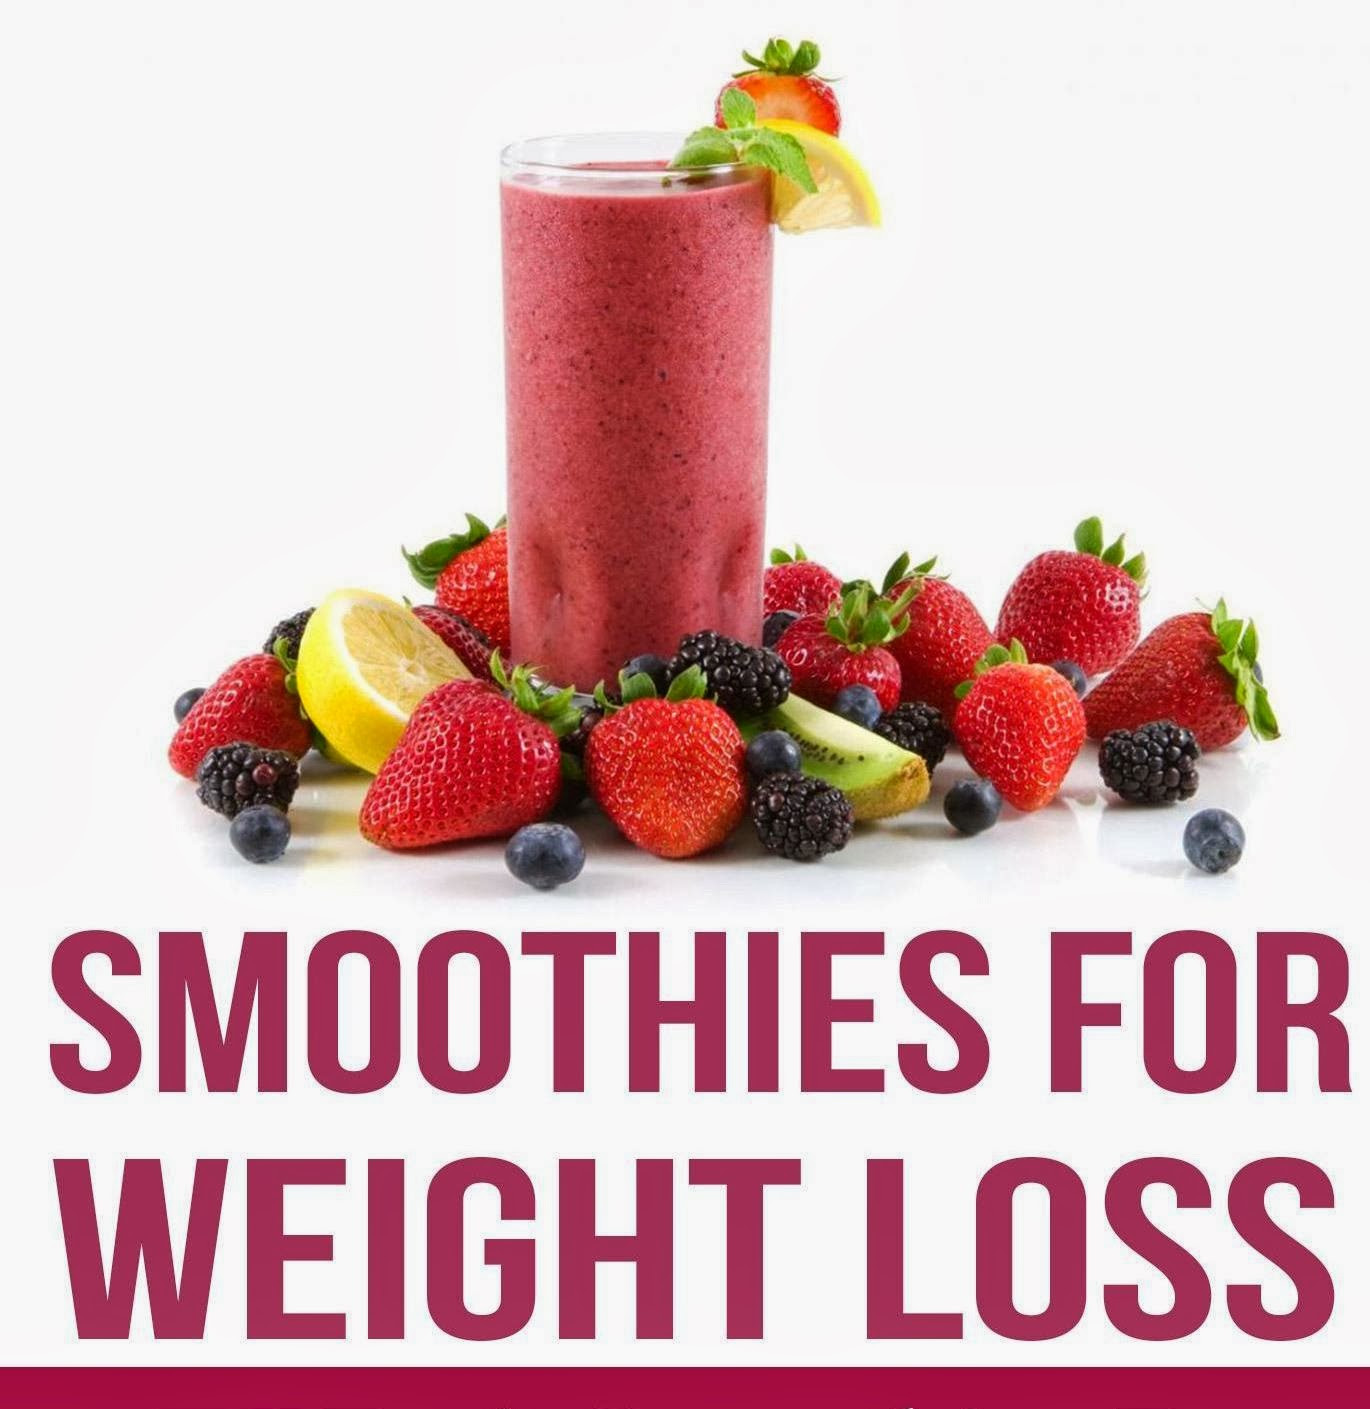 Weight Loss Fruit Smoothies
 NATURAL FRUIT SMOOTHIES FOR WEIGHT LOSS Natural Fitness Tips